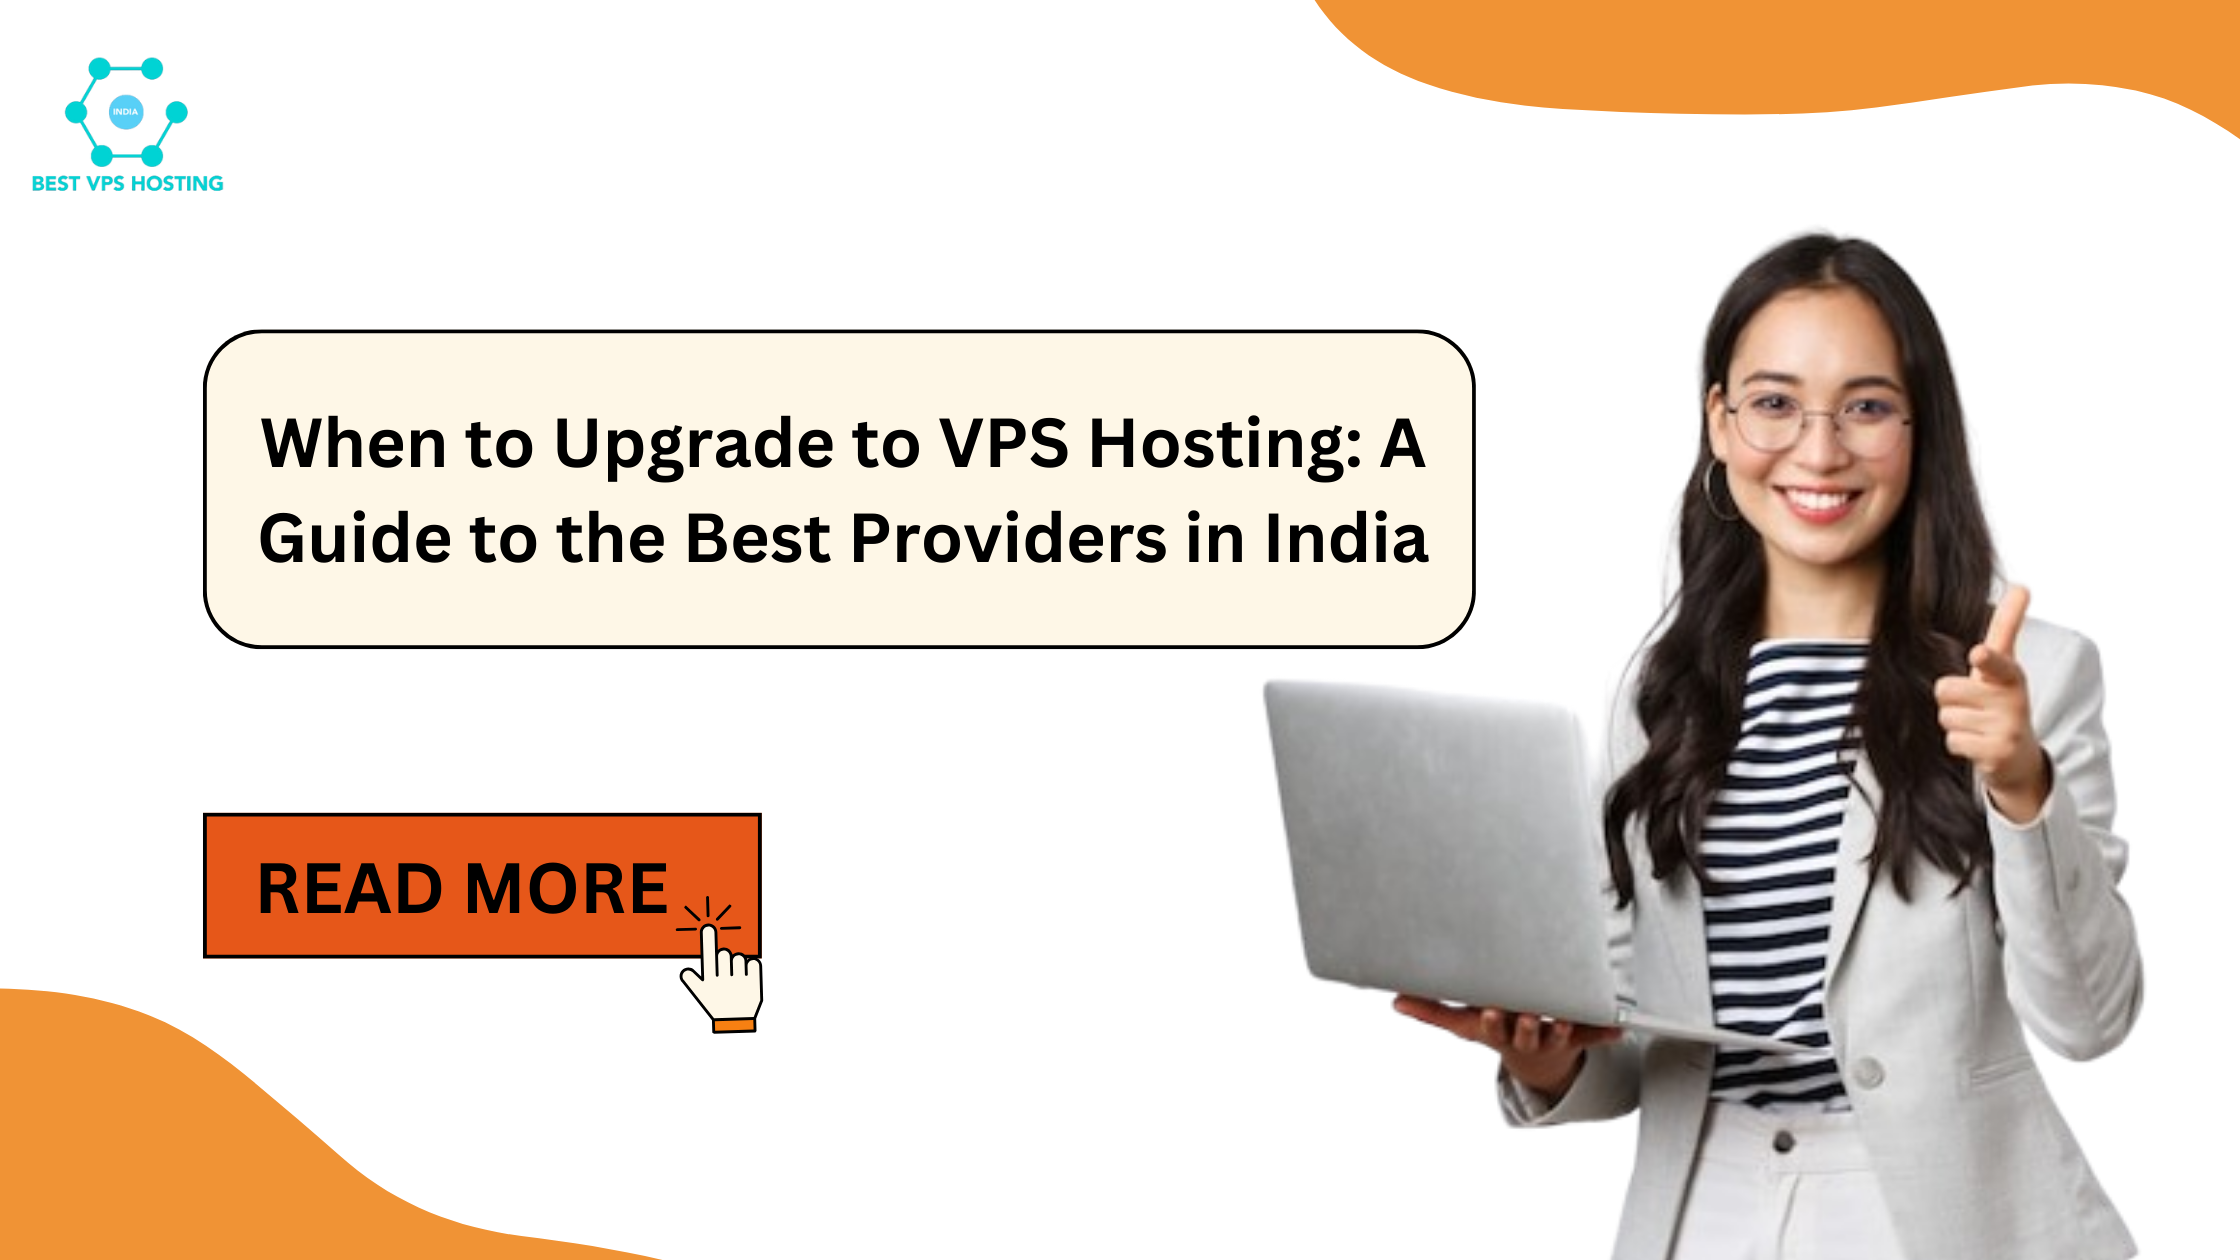 When to Upgrade to VPS Hosting: A Guide to the Best Providers in India